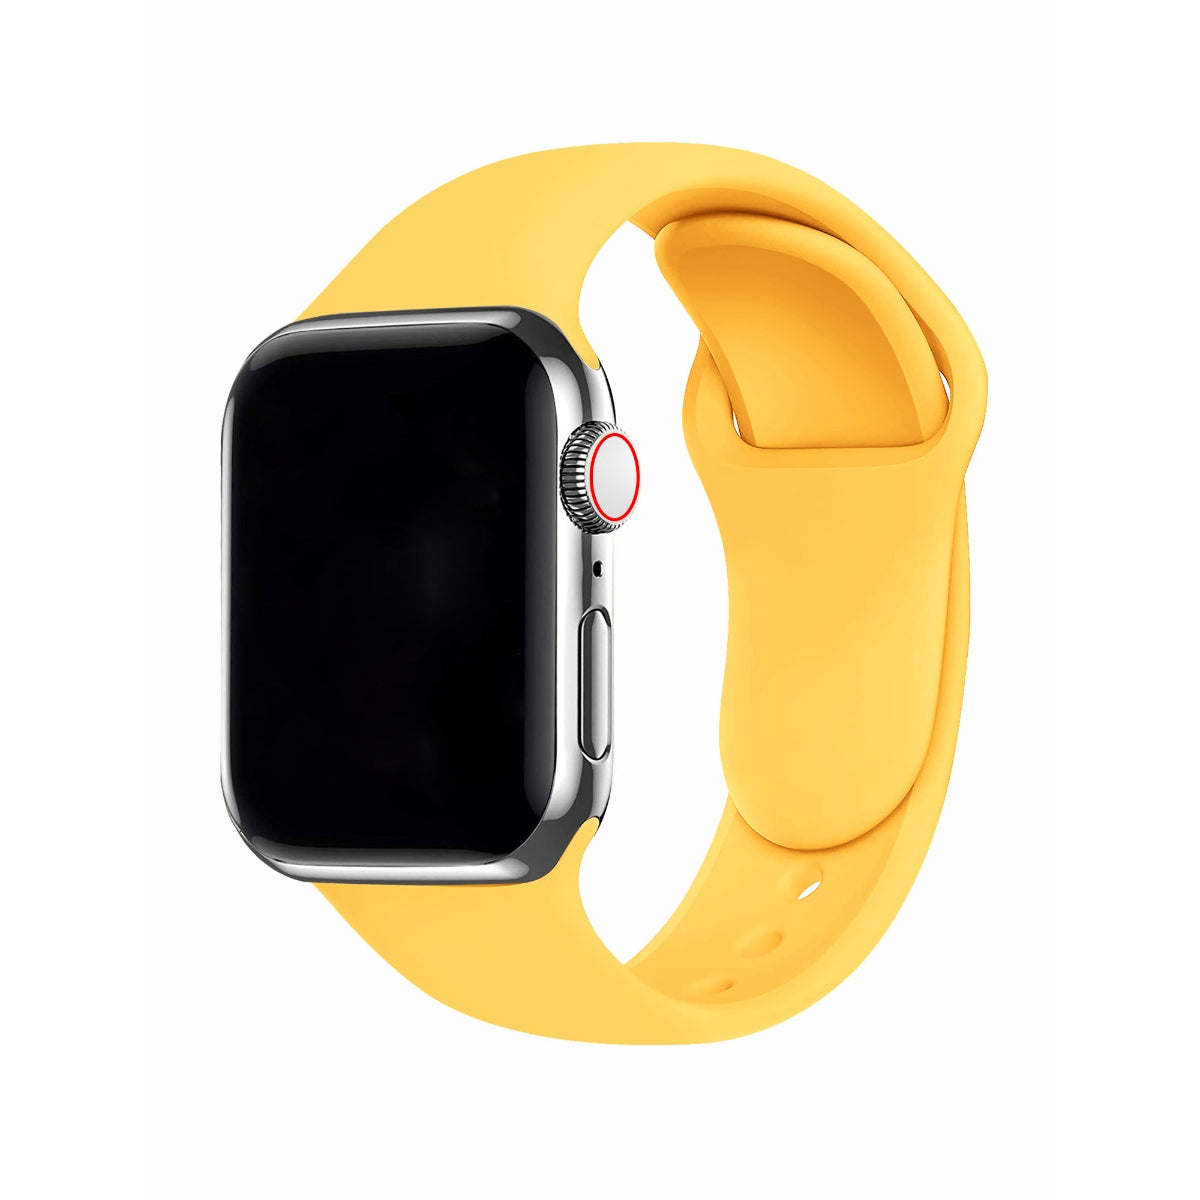 Basic Solid Yellow Apple Watch Strap